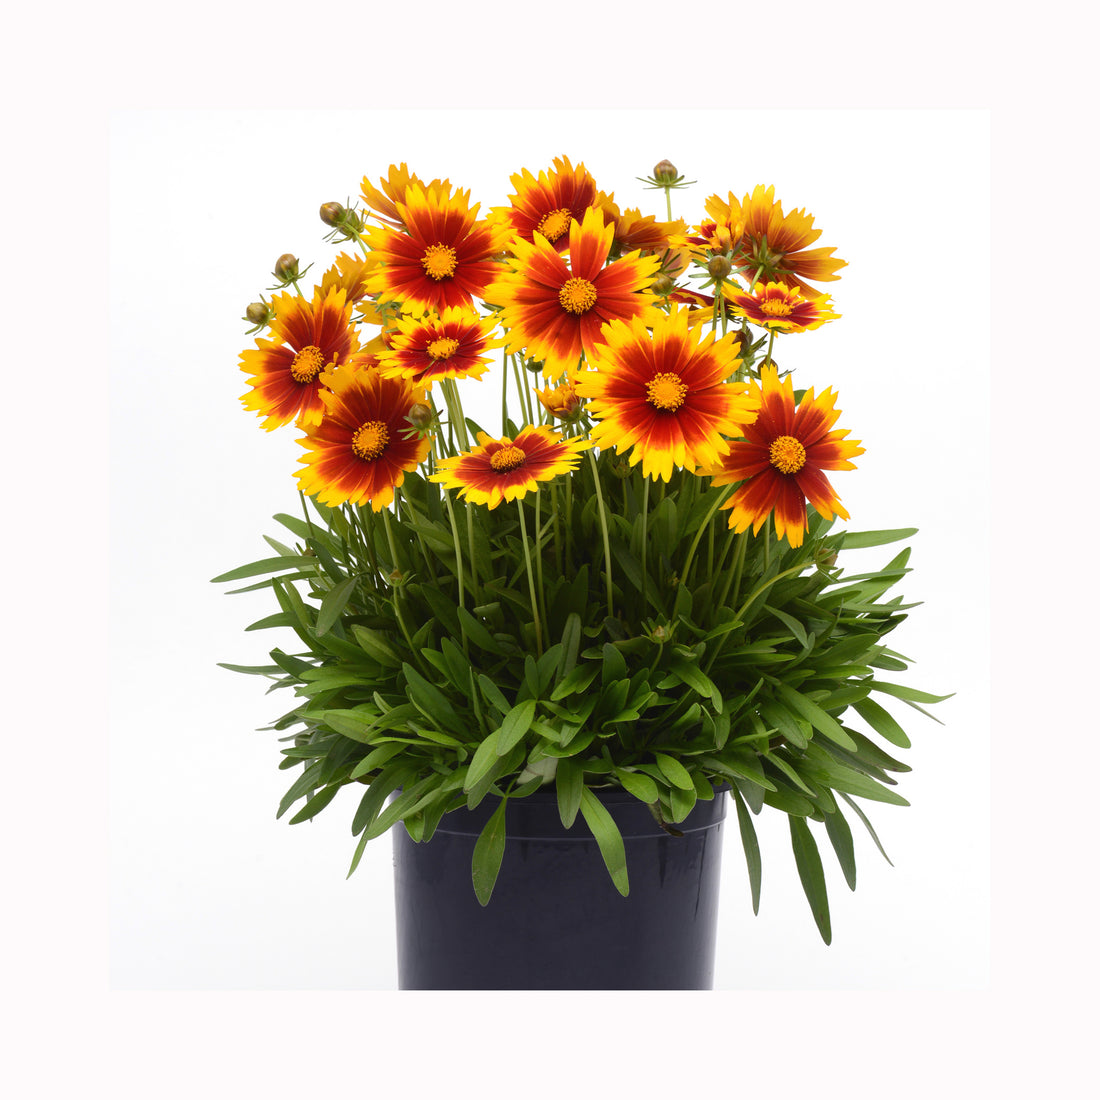 Coreopsis UpTick Gold and Bronze